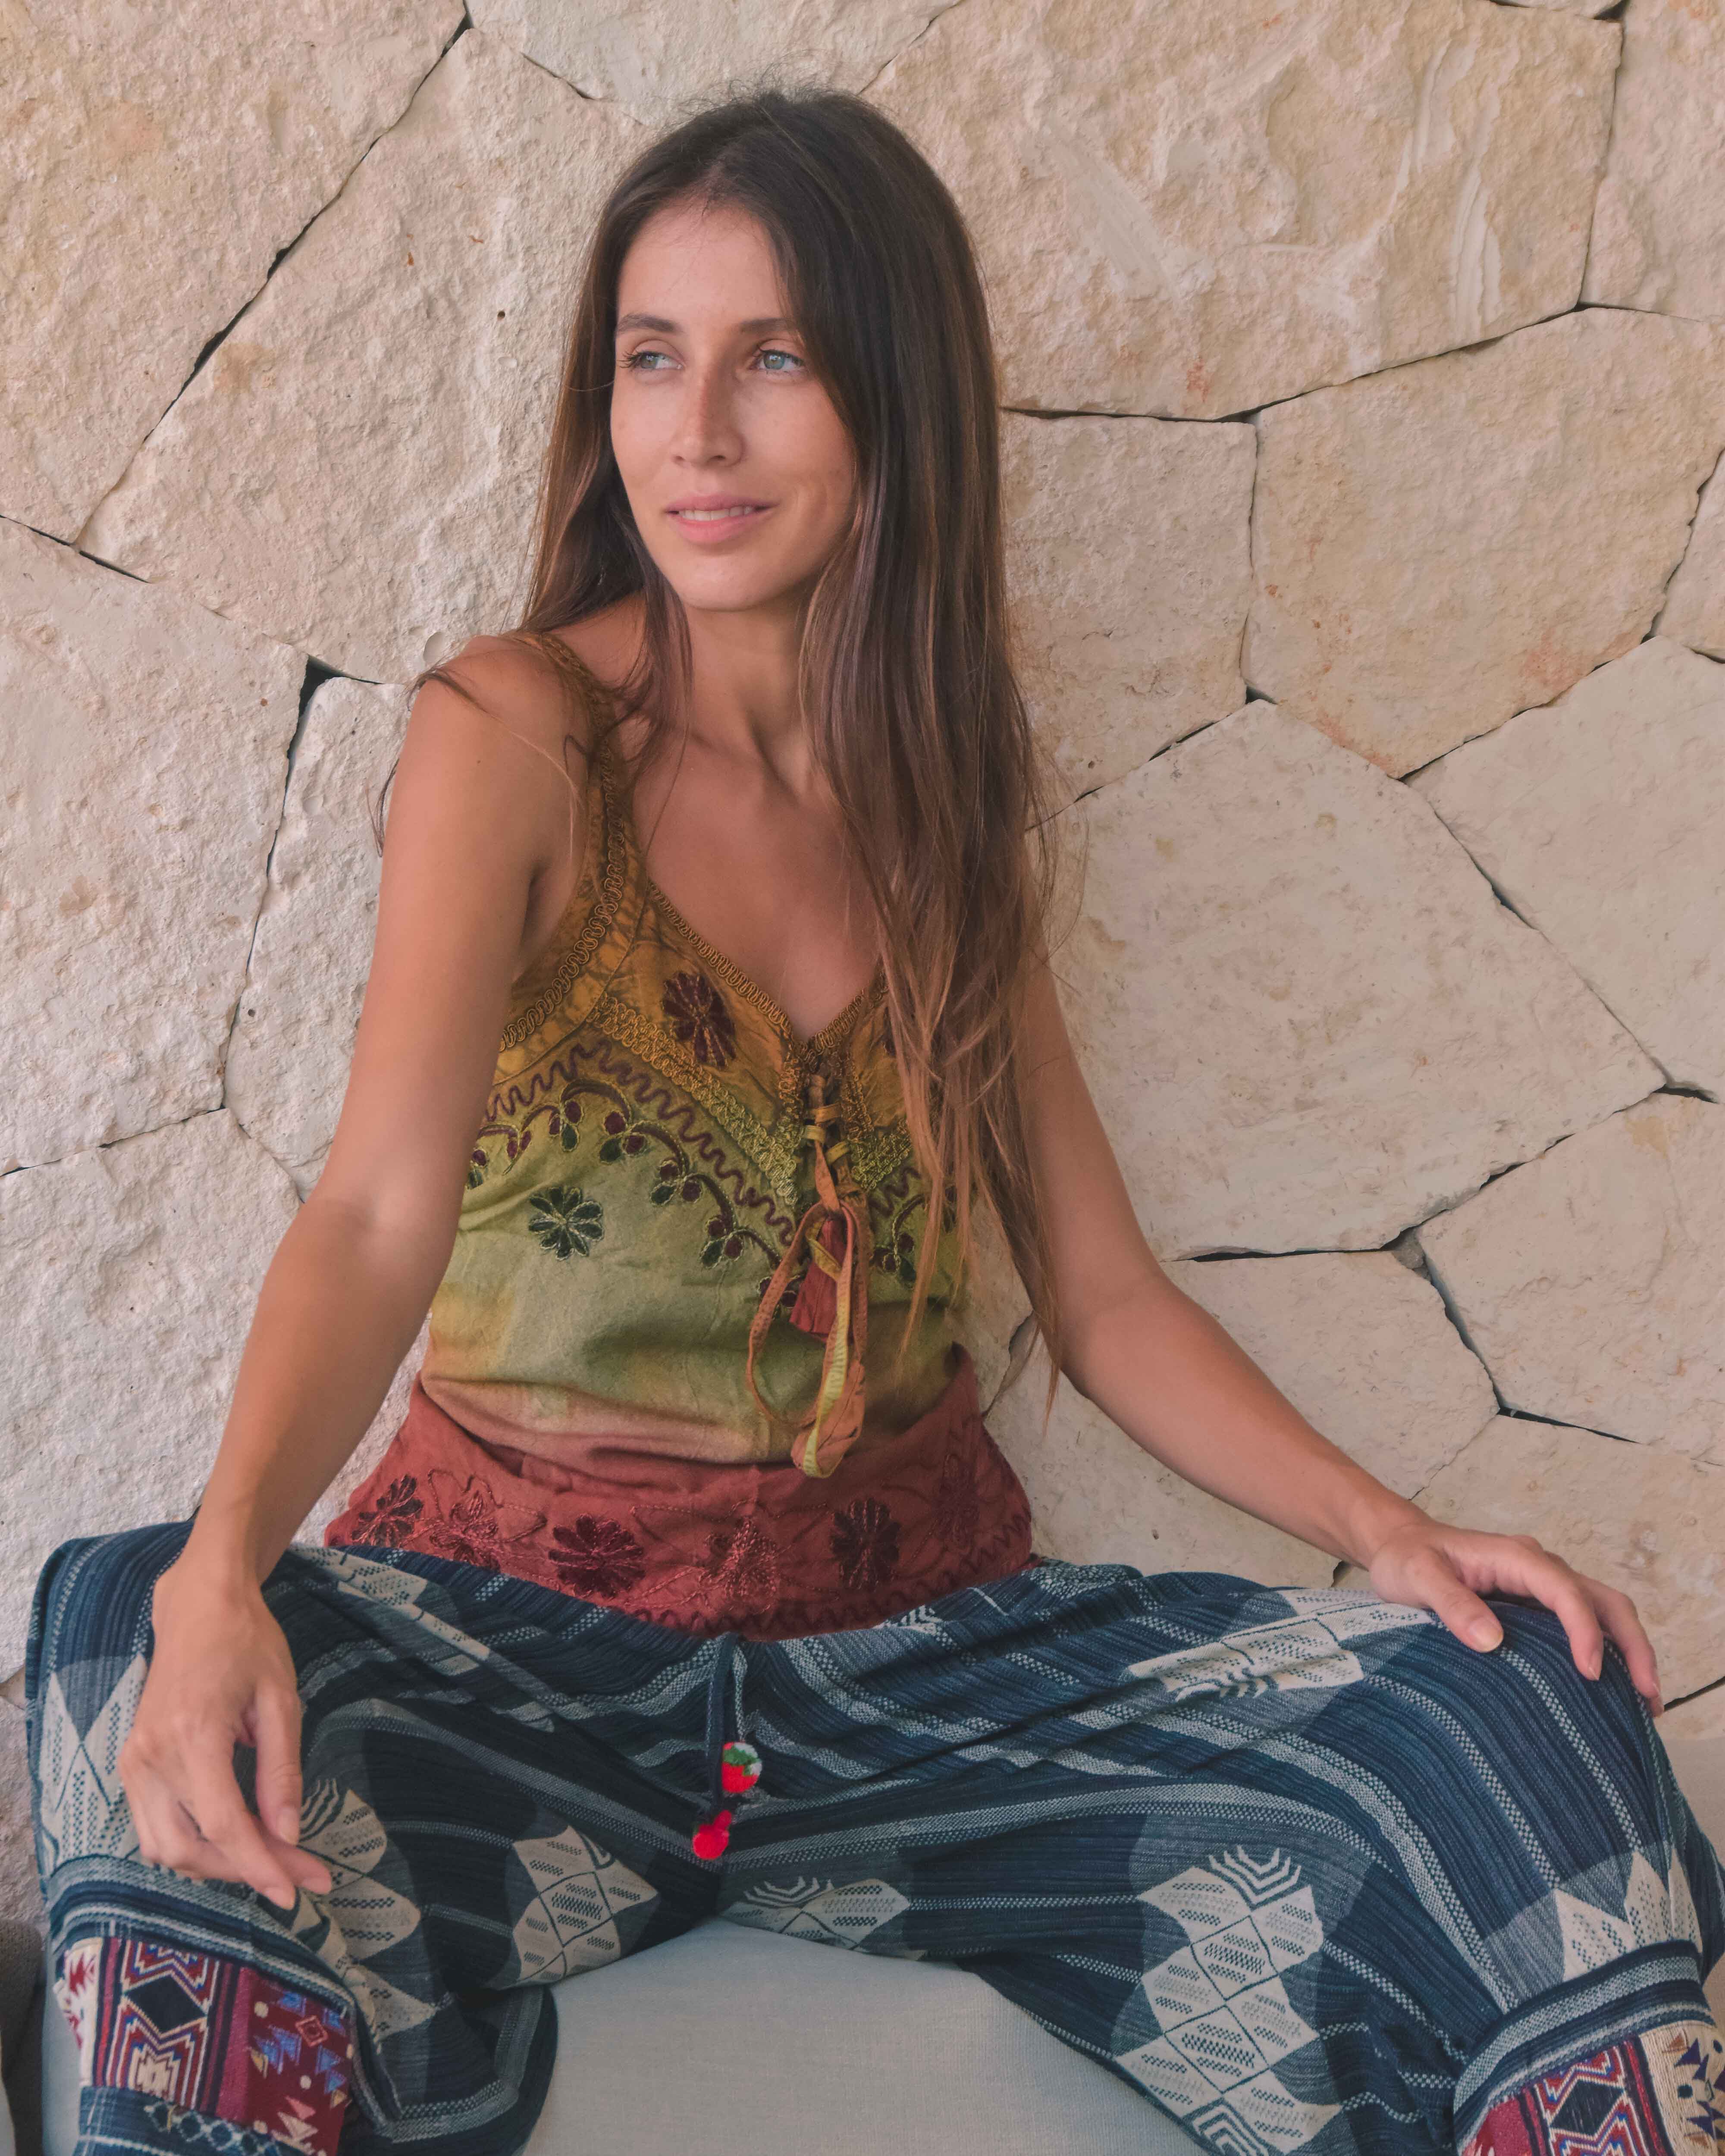 JAIPUR BLOUSE Elepanta Women's Top - Buy Today Elephant Pants Jewelry And Bohemian Clothes Handmade In Thailand Help To Save The Elephants FairTrade And Vegan